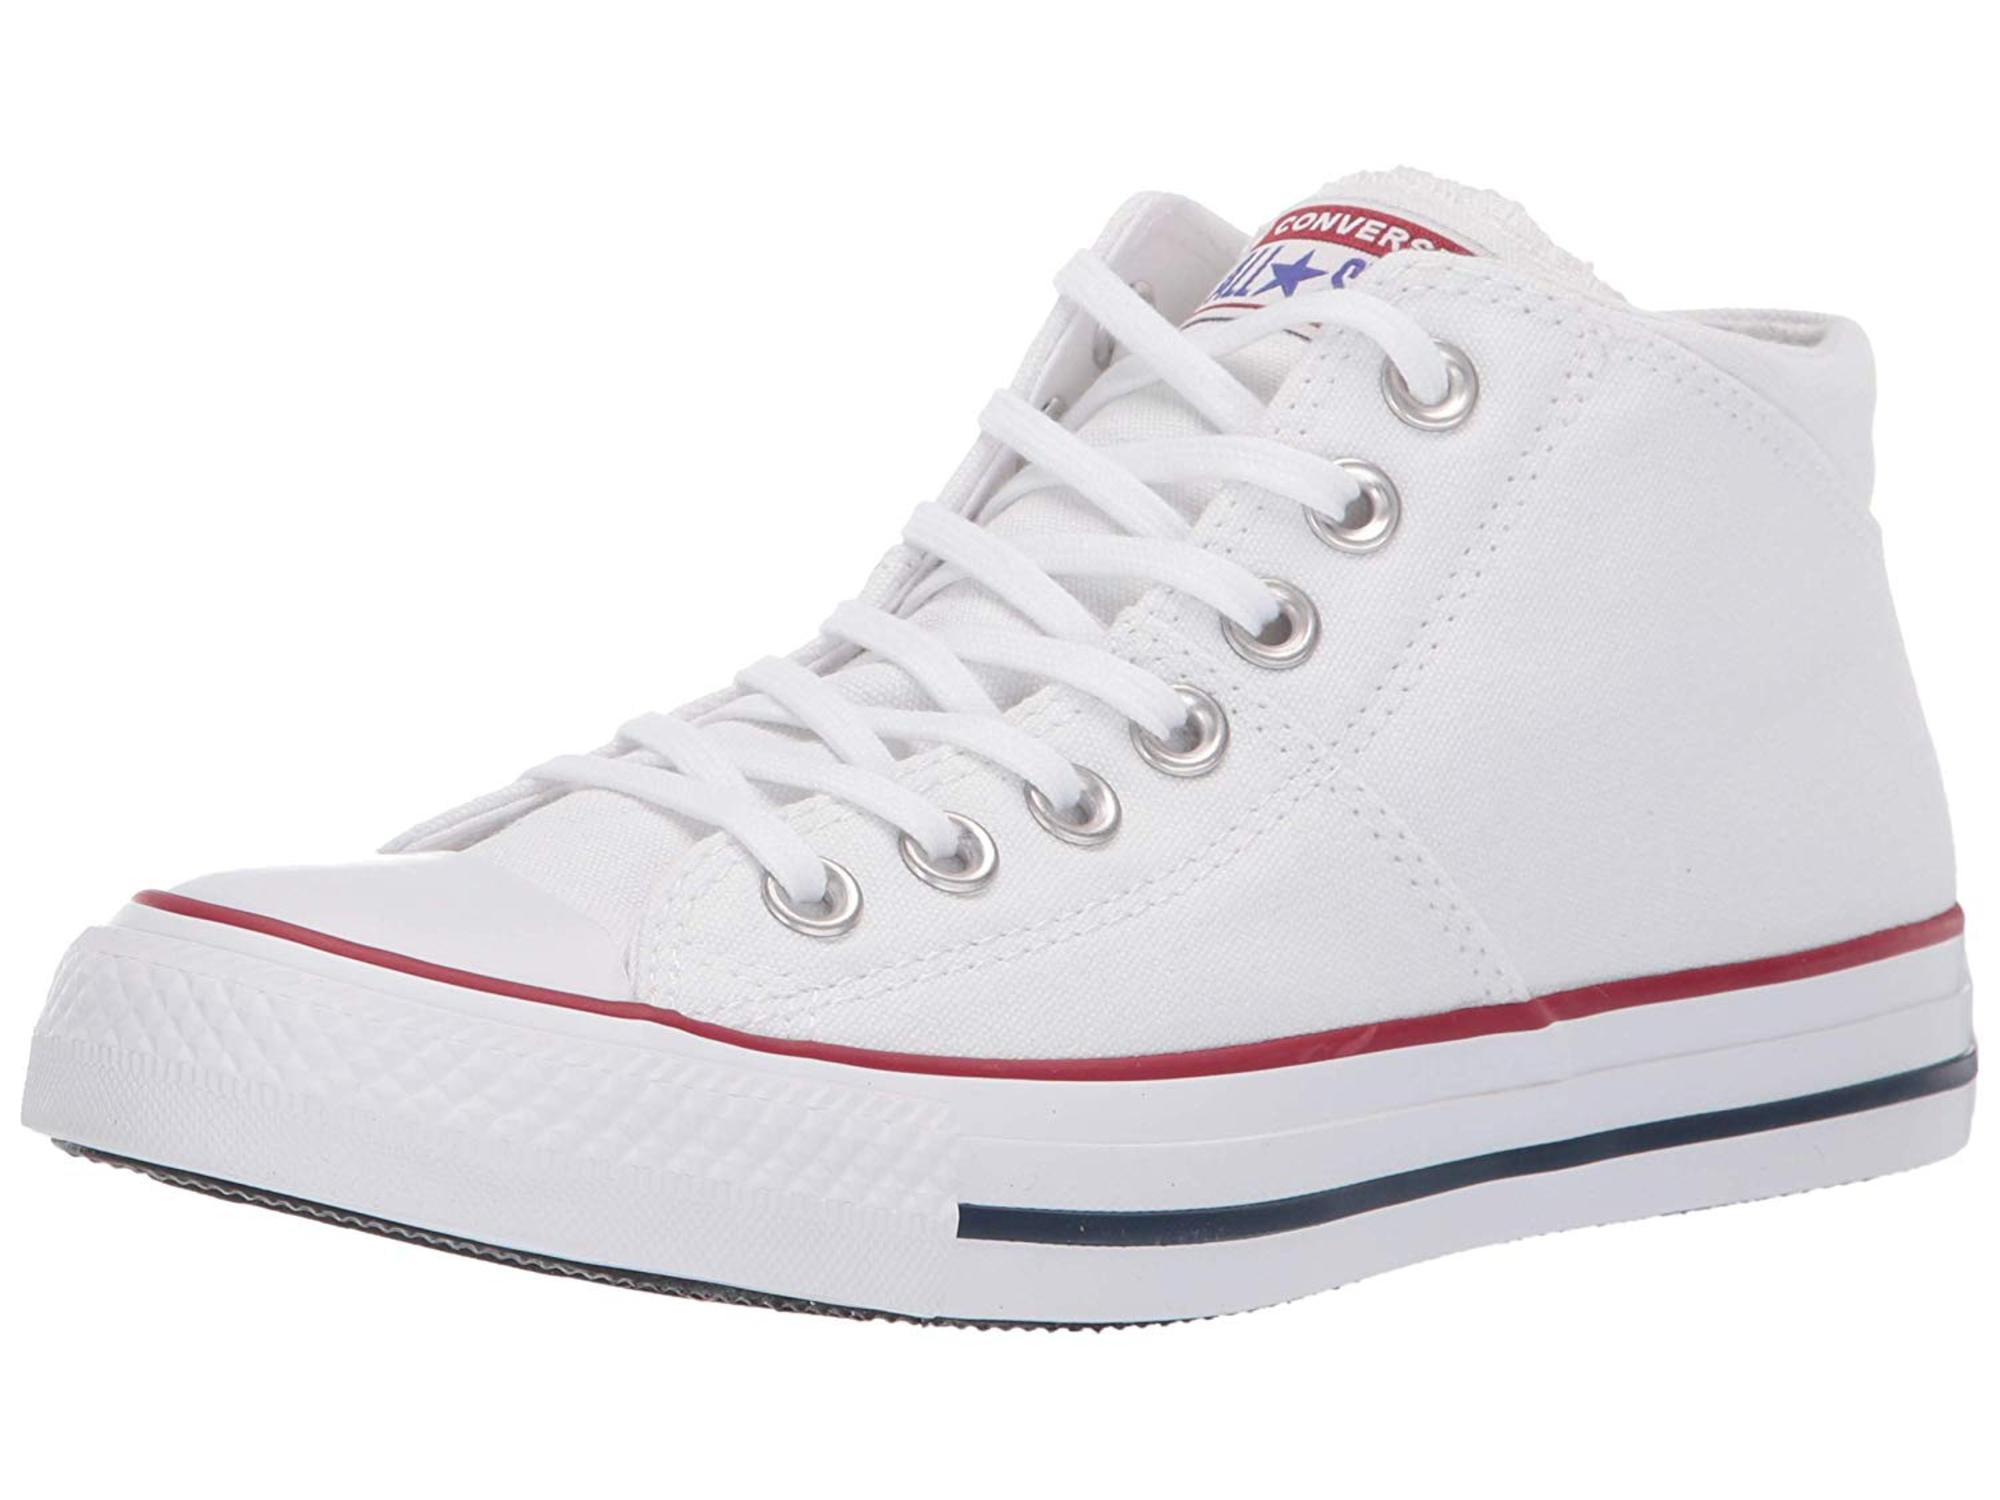 Converse - Women's Converse Chuck Taylor All Star Madison Canvas Mid ...